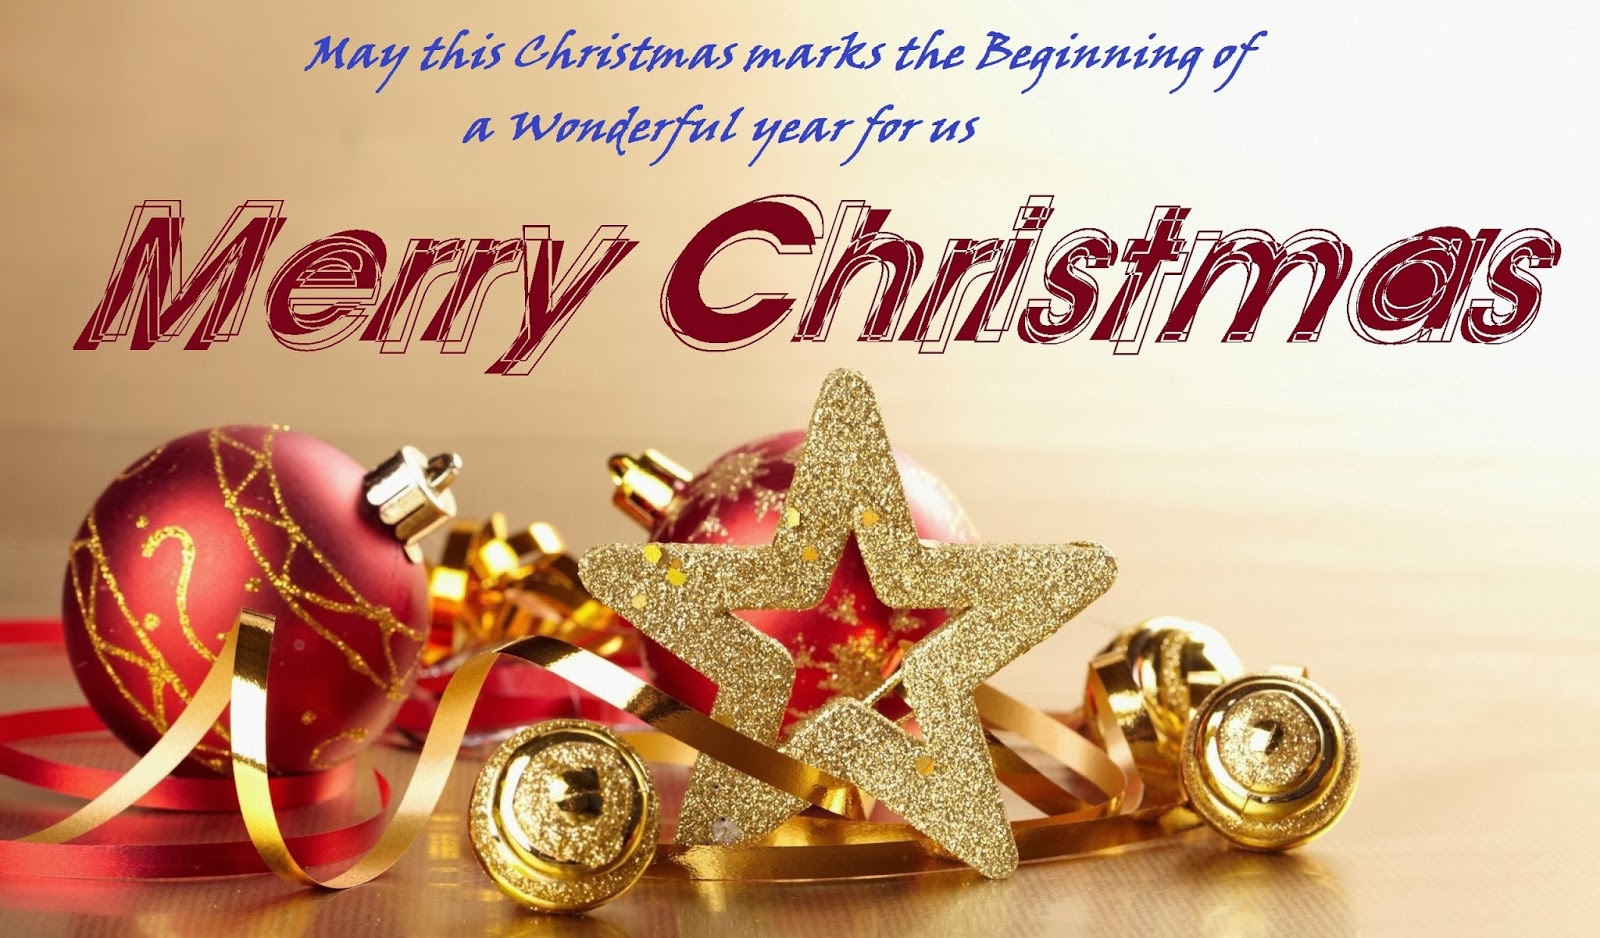 christmas greeting and wishes 2016 hd image